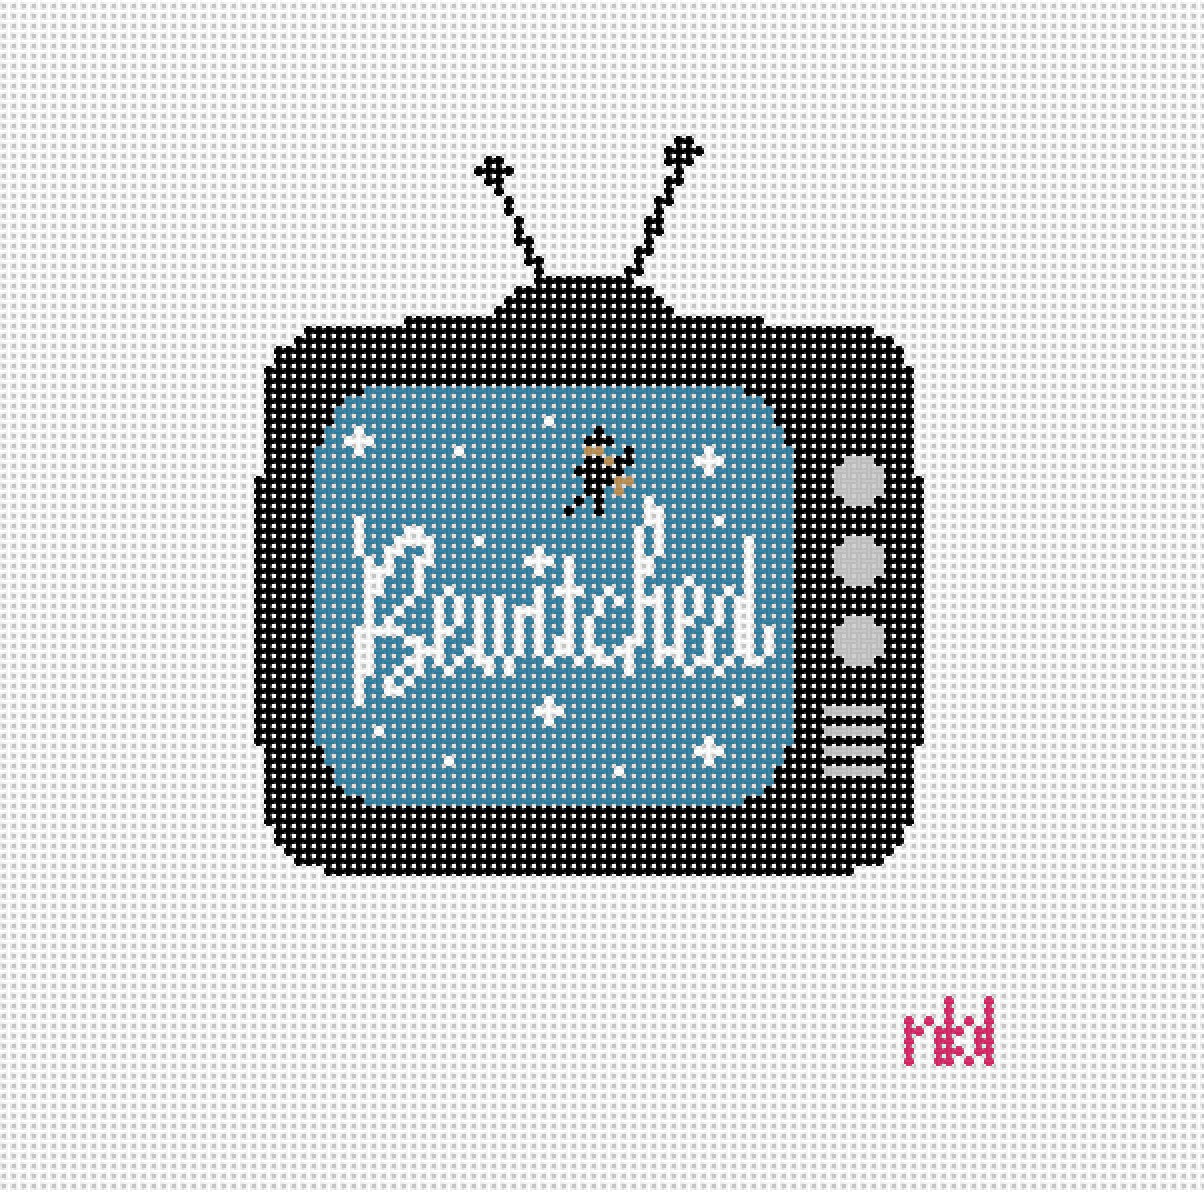 Retro TV Needlepoint Canvas Bewitched - Needlepoint by Laura